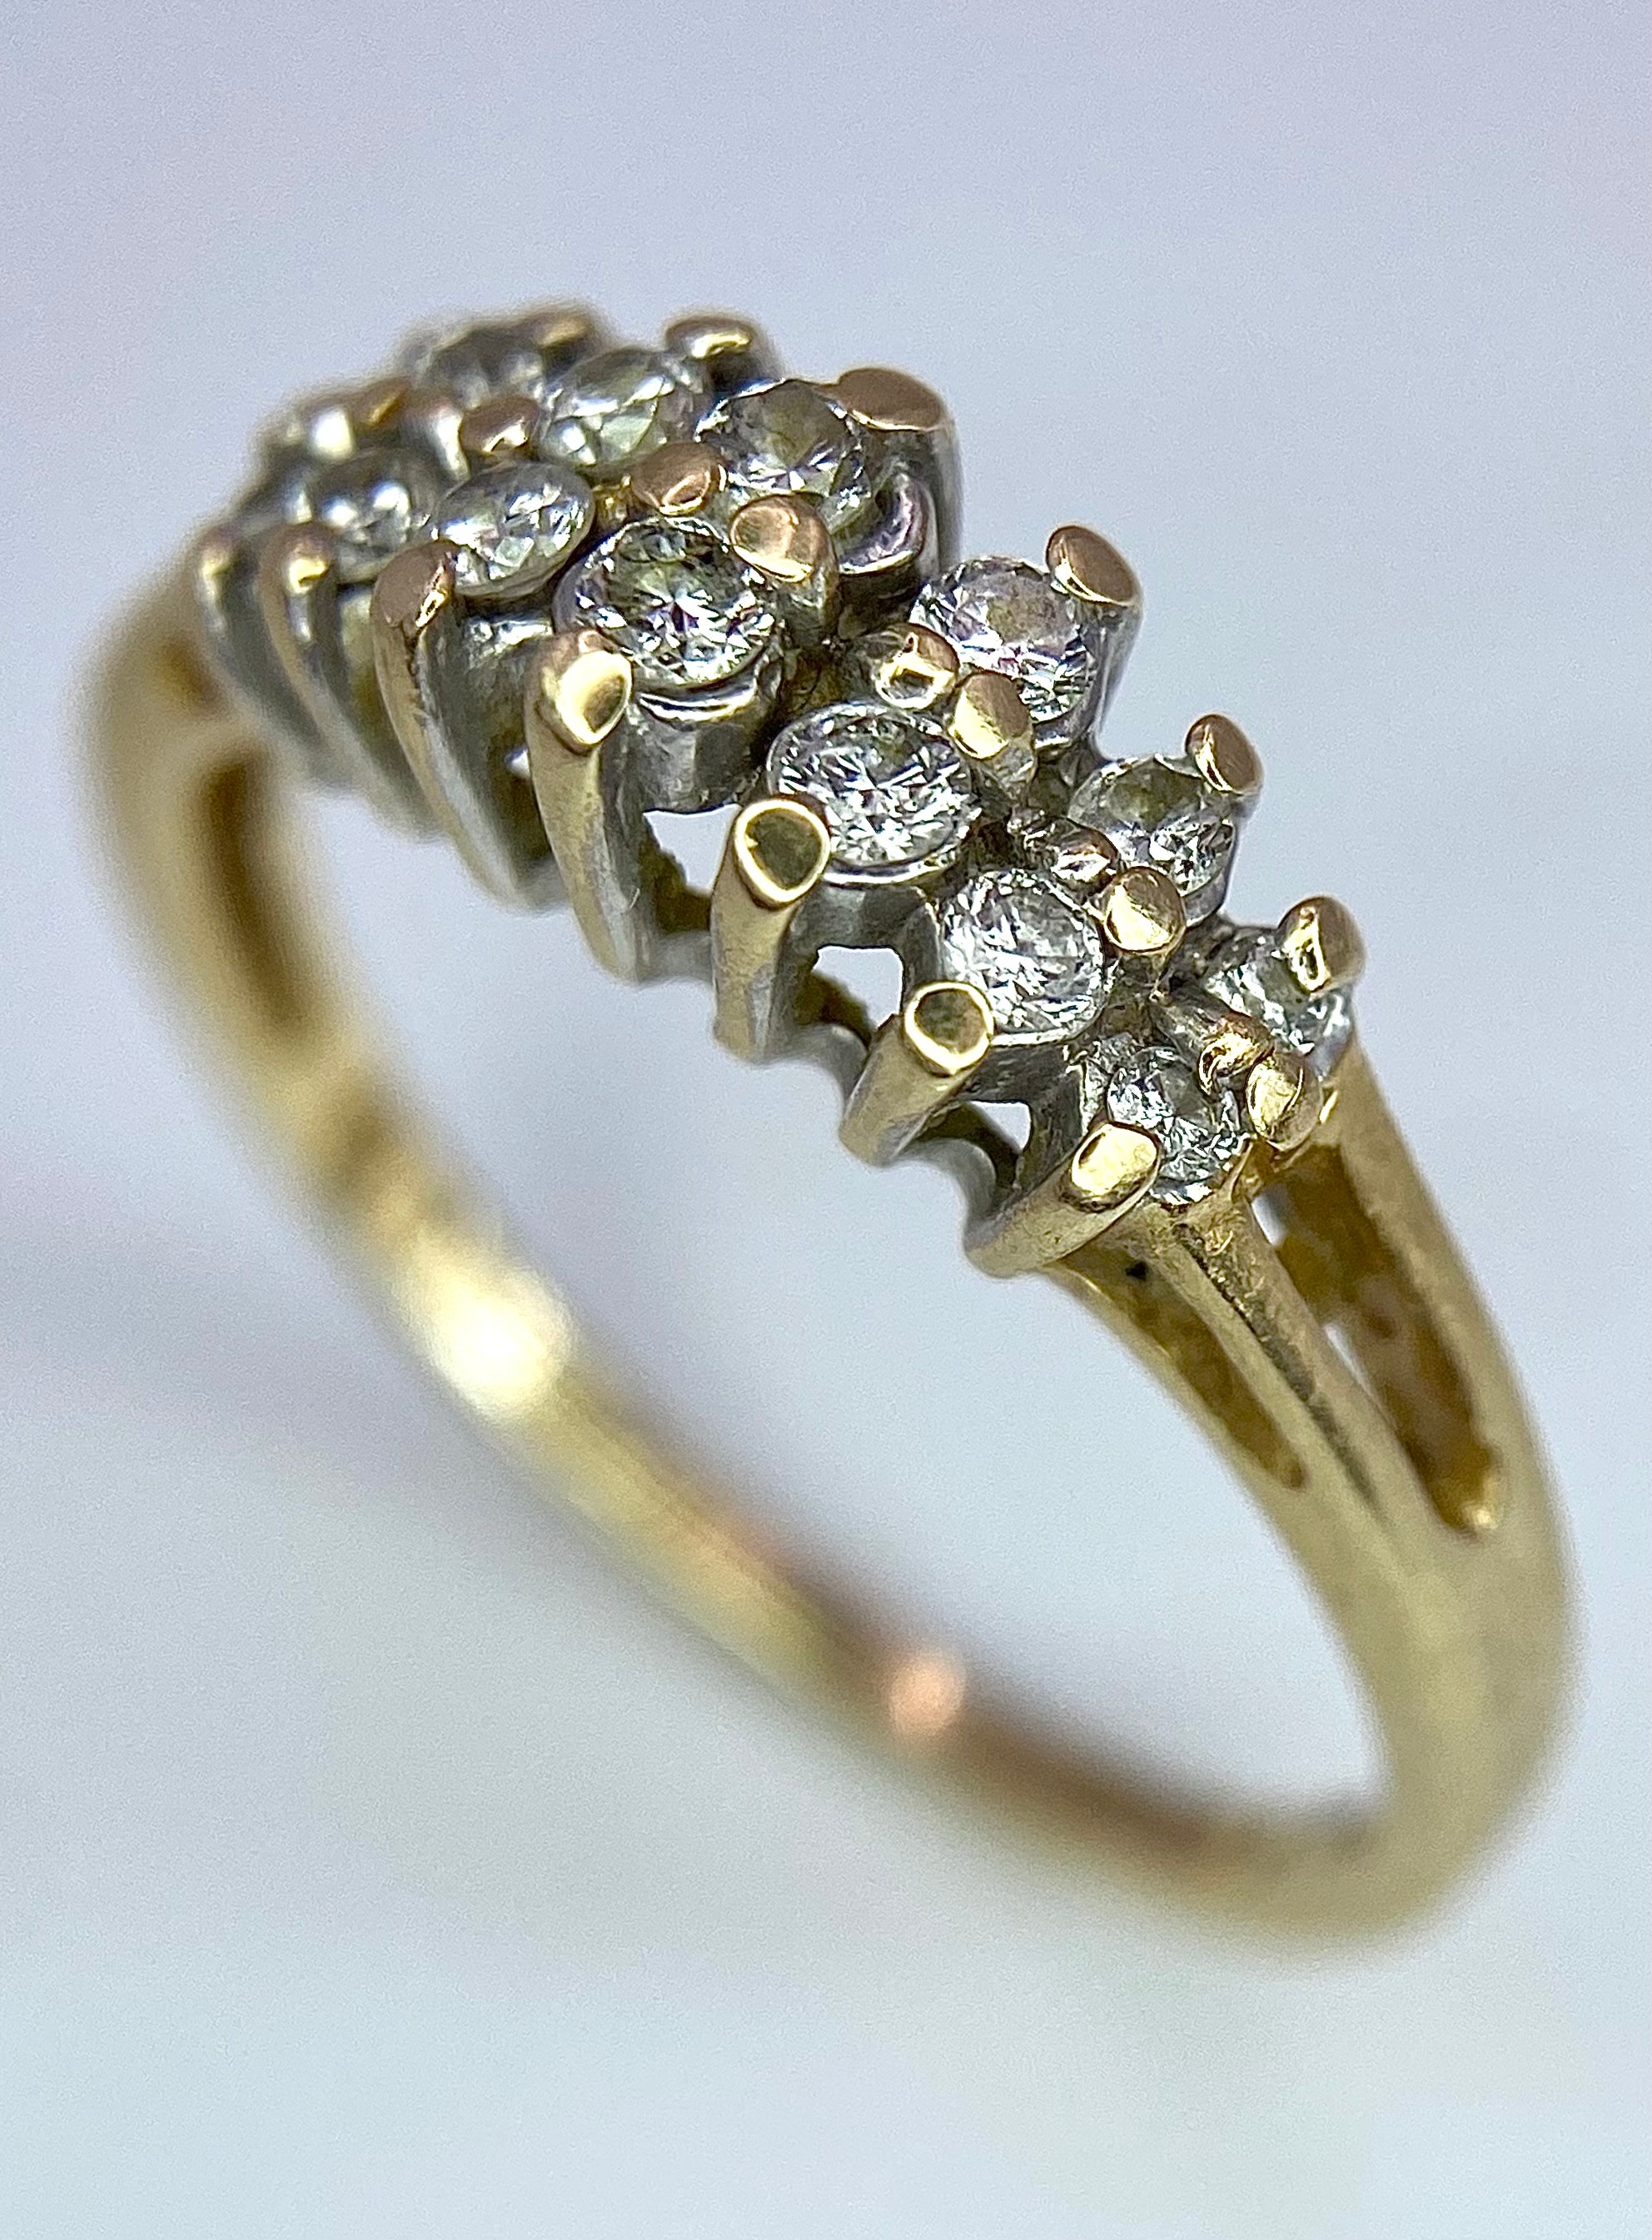 A 9K YELLOW GOLD DIAMOND BAND RING 3.1G SIZE P 1/2. SC 9067 - Image 2 of 7